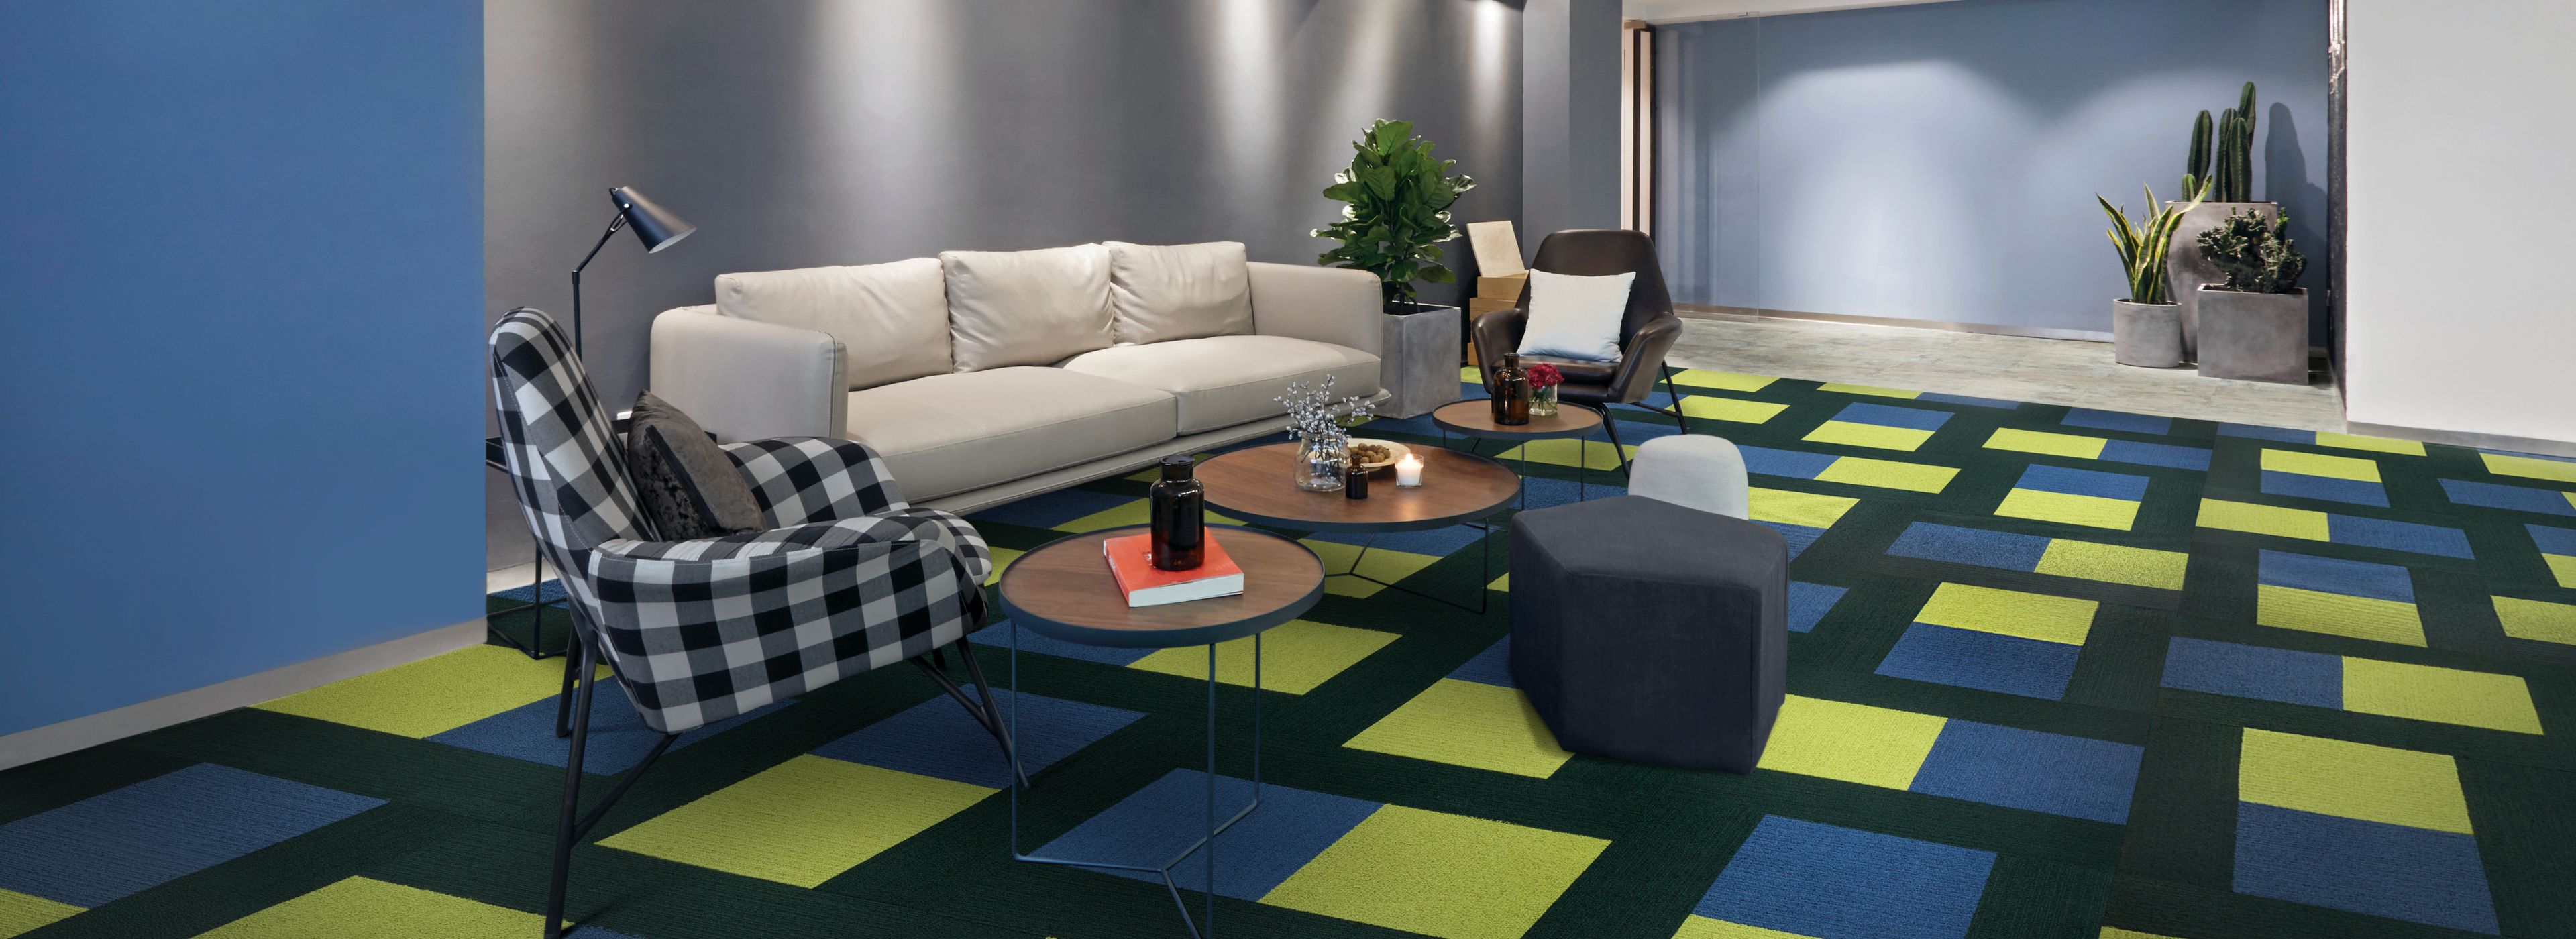 Interface Viva Colores carpet tile and Textured Stones LVT in seating area with couch  numéro d’image 1